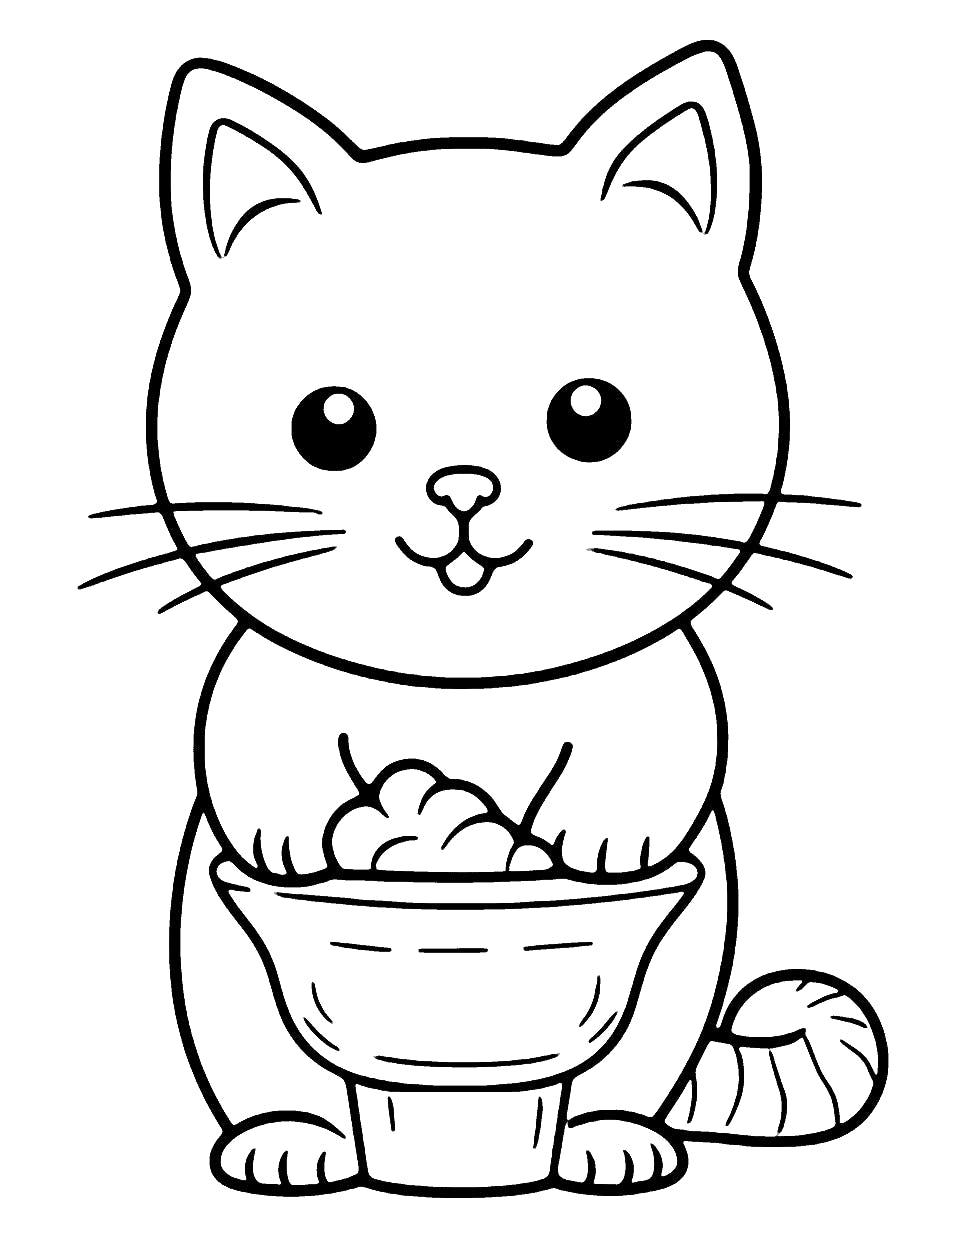 Explore the Magical World of Cat Coloring Pages